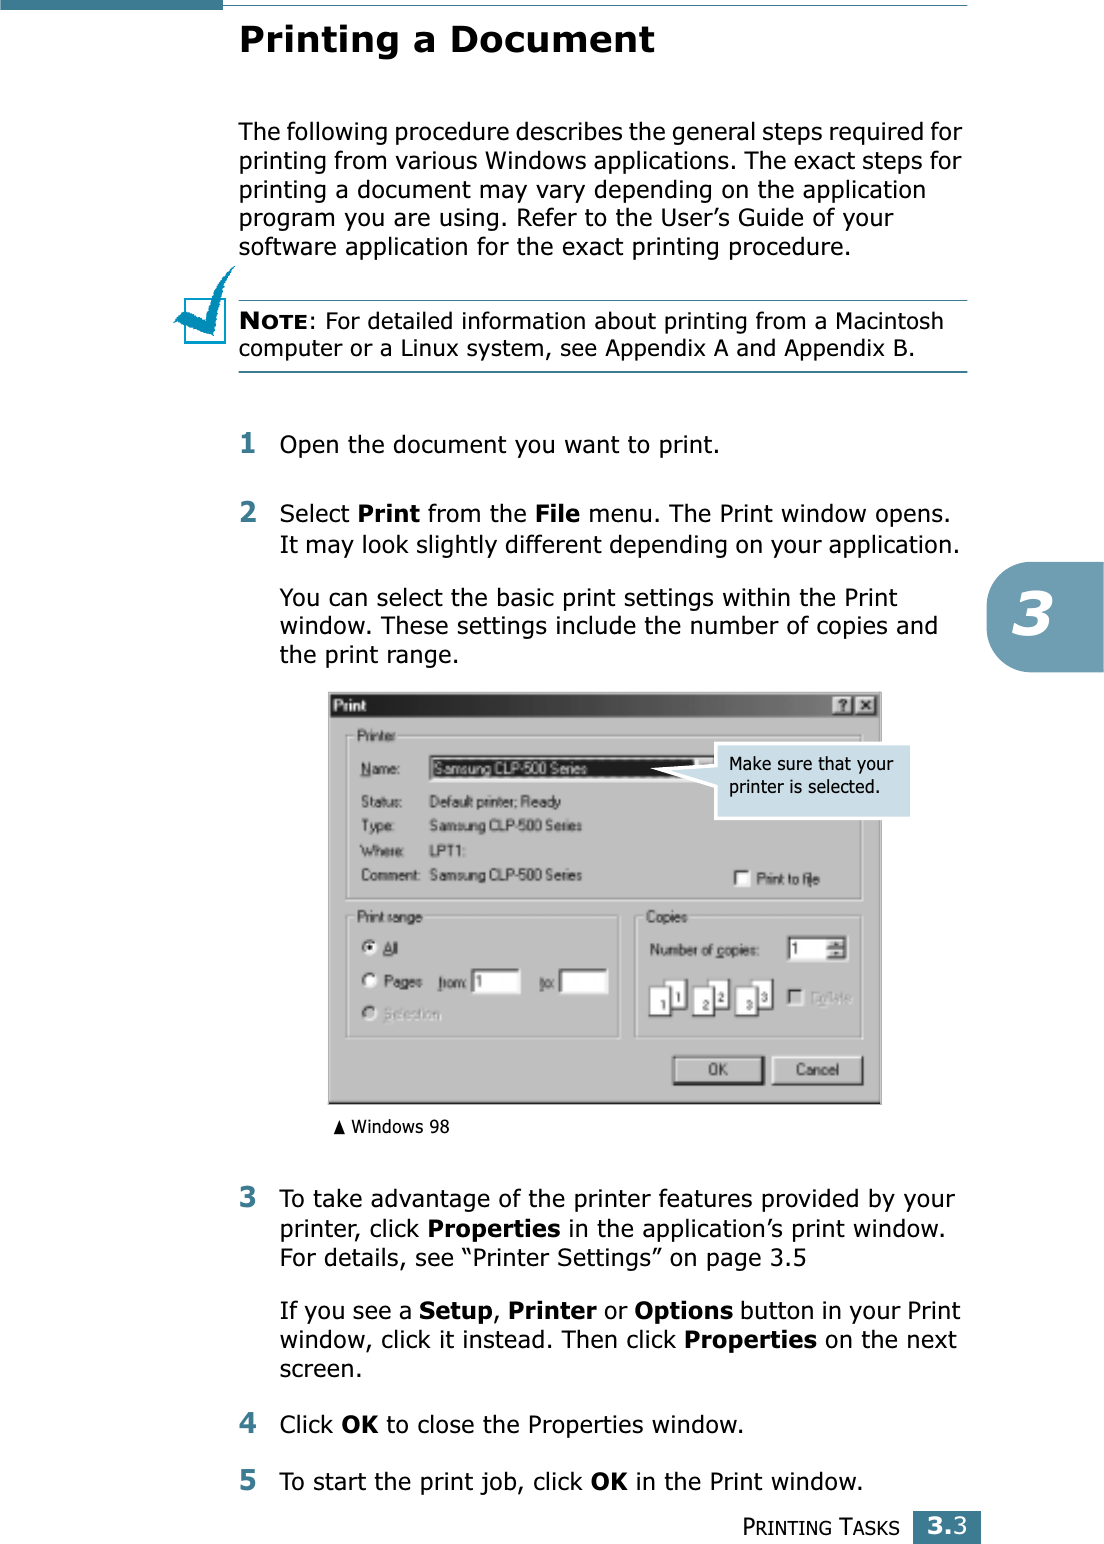 PRINTING TASKS3.33Printing a DocumentThe following procedure describes the general steps required for printing from various Windows applications. The exact steps for printing a document may vary depending on the application program you are using. Refer to the User’s Guide of your software application for the exact printing procedure.NOTE: For detailed information about printing from a Macintosh computer or a Linux system, see Appendix A and Appendix B.1Open the document you want to print.2Select Print from the File menu. The Print window opens. It may look slightly different depending on your application. You can select the basic print settings within the Print window. These settings include the number of copies and the print range.3To take advantage of the printer features provided by your printer, click Properties in the application’s print window. For details, see “Printer Settings” on page 3.5If you see a Setup, Printer or Options button in your Print window, click it instead. Then click Properties on the next screen.4Click OK to close the Properties window.5To start the print job, click OK in the Print window.Make sure that your printer is selected.Windows 98